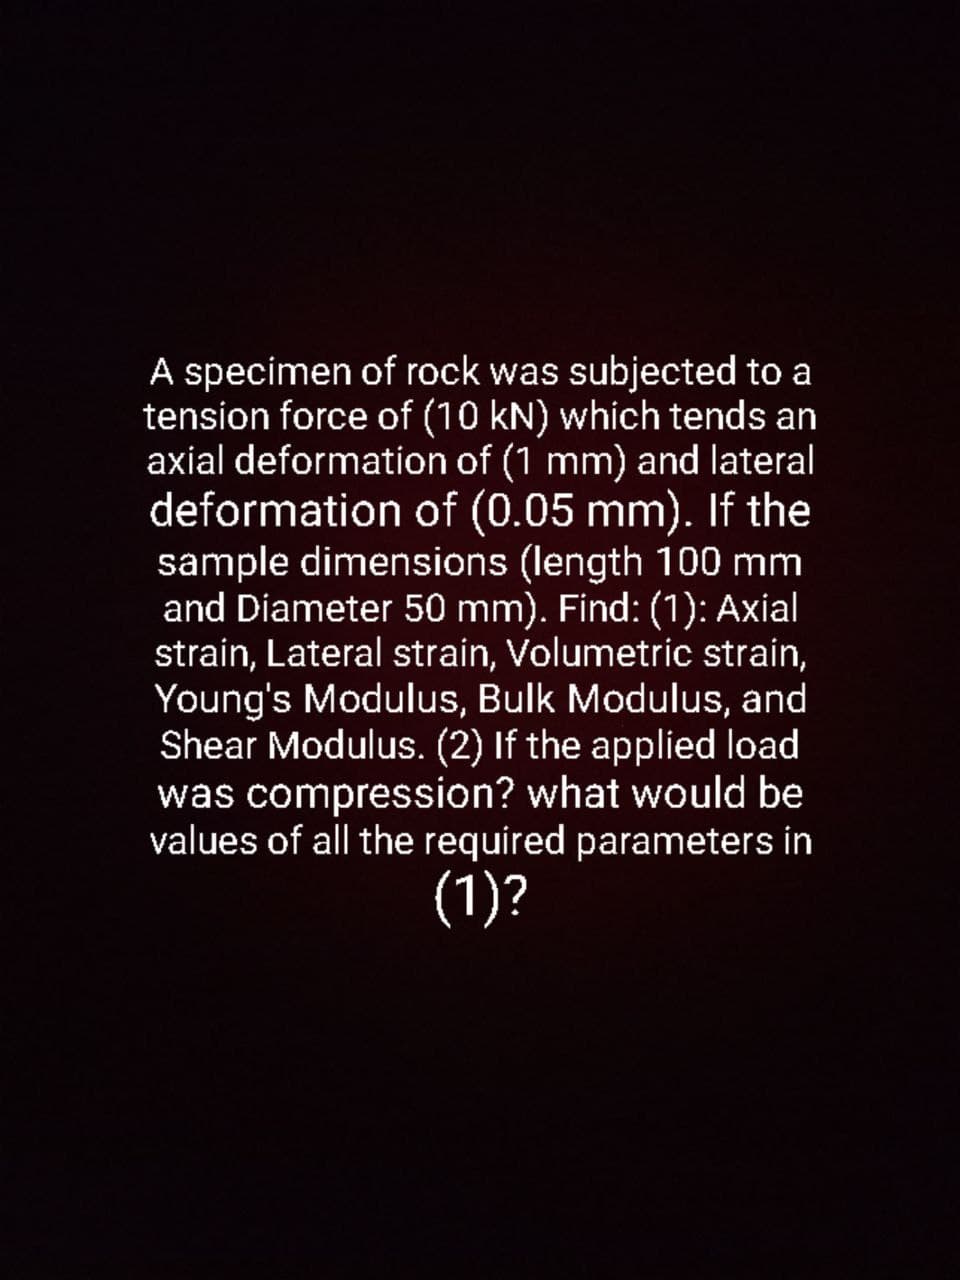 A specimen of rock was subjected to a
tension force of (10 kN) which tends an
axial deformation of (1 mm) and lateral
deformation of (0.05 mm). If the
sample dimensions (length 100 mm
and Diameter 50 mm). Find: (1): Axial
strain, Lateral strain, Volumetric strain,
Young's Modulus, Bulk Modulus, and
Shear Modulus. (2) If the applied load
was compression? what would be
values of all the required parameters in
(1)?